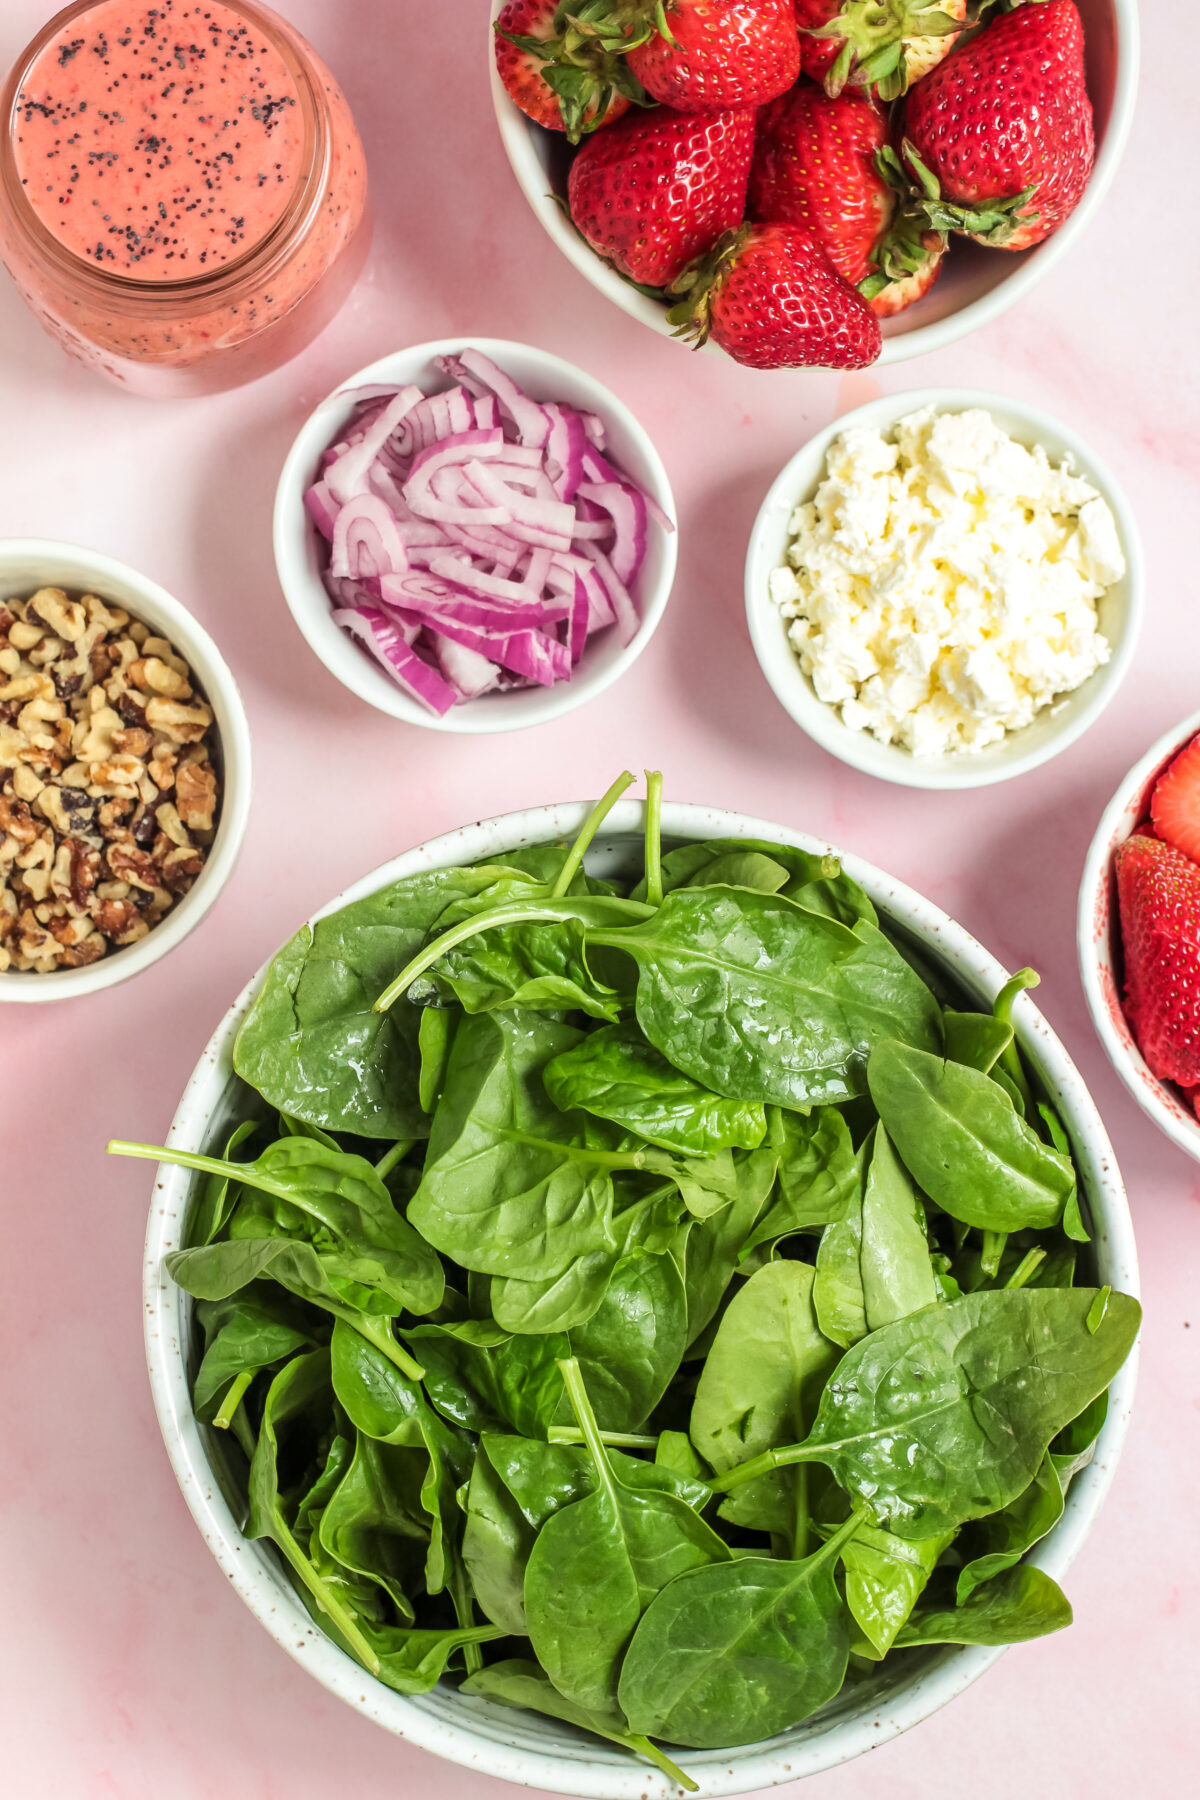 Ingredients for strawberry spinach salad in individual bowls.